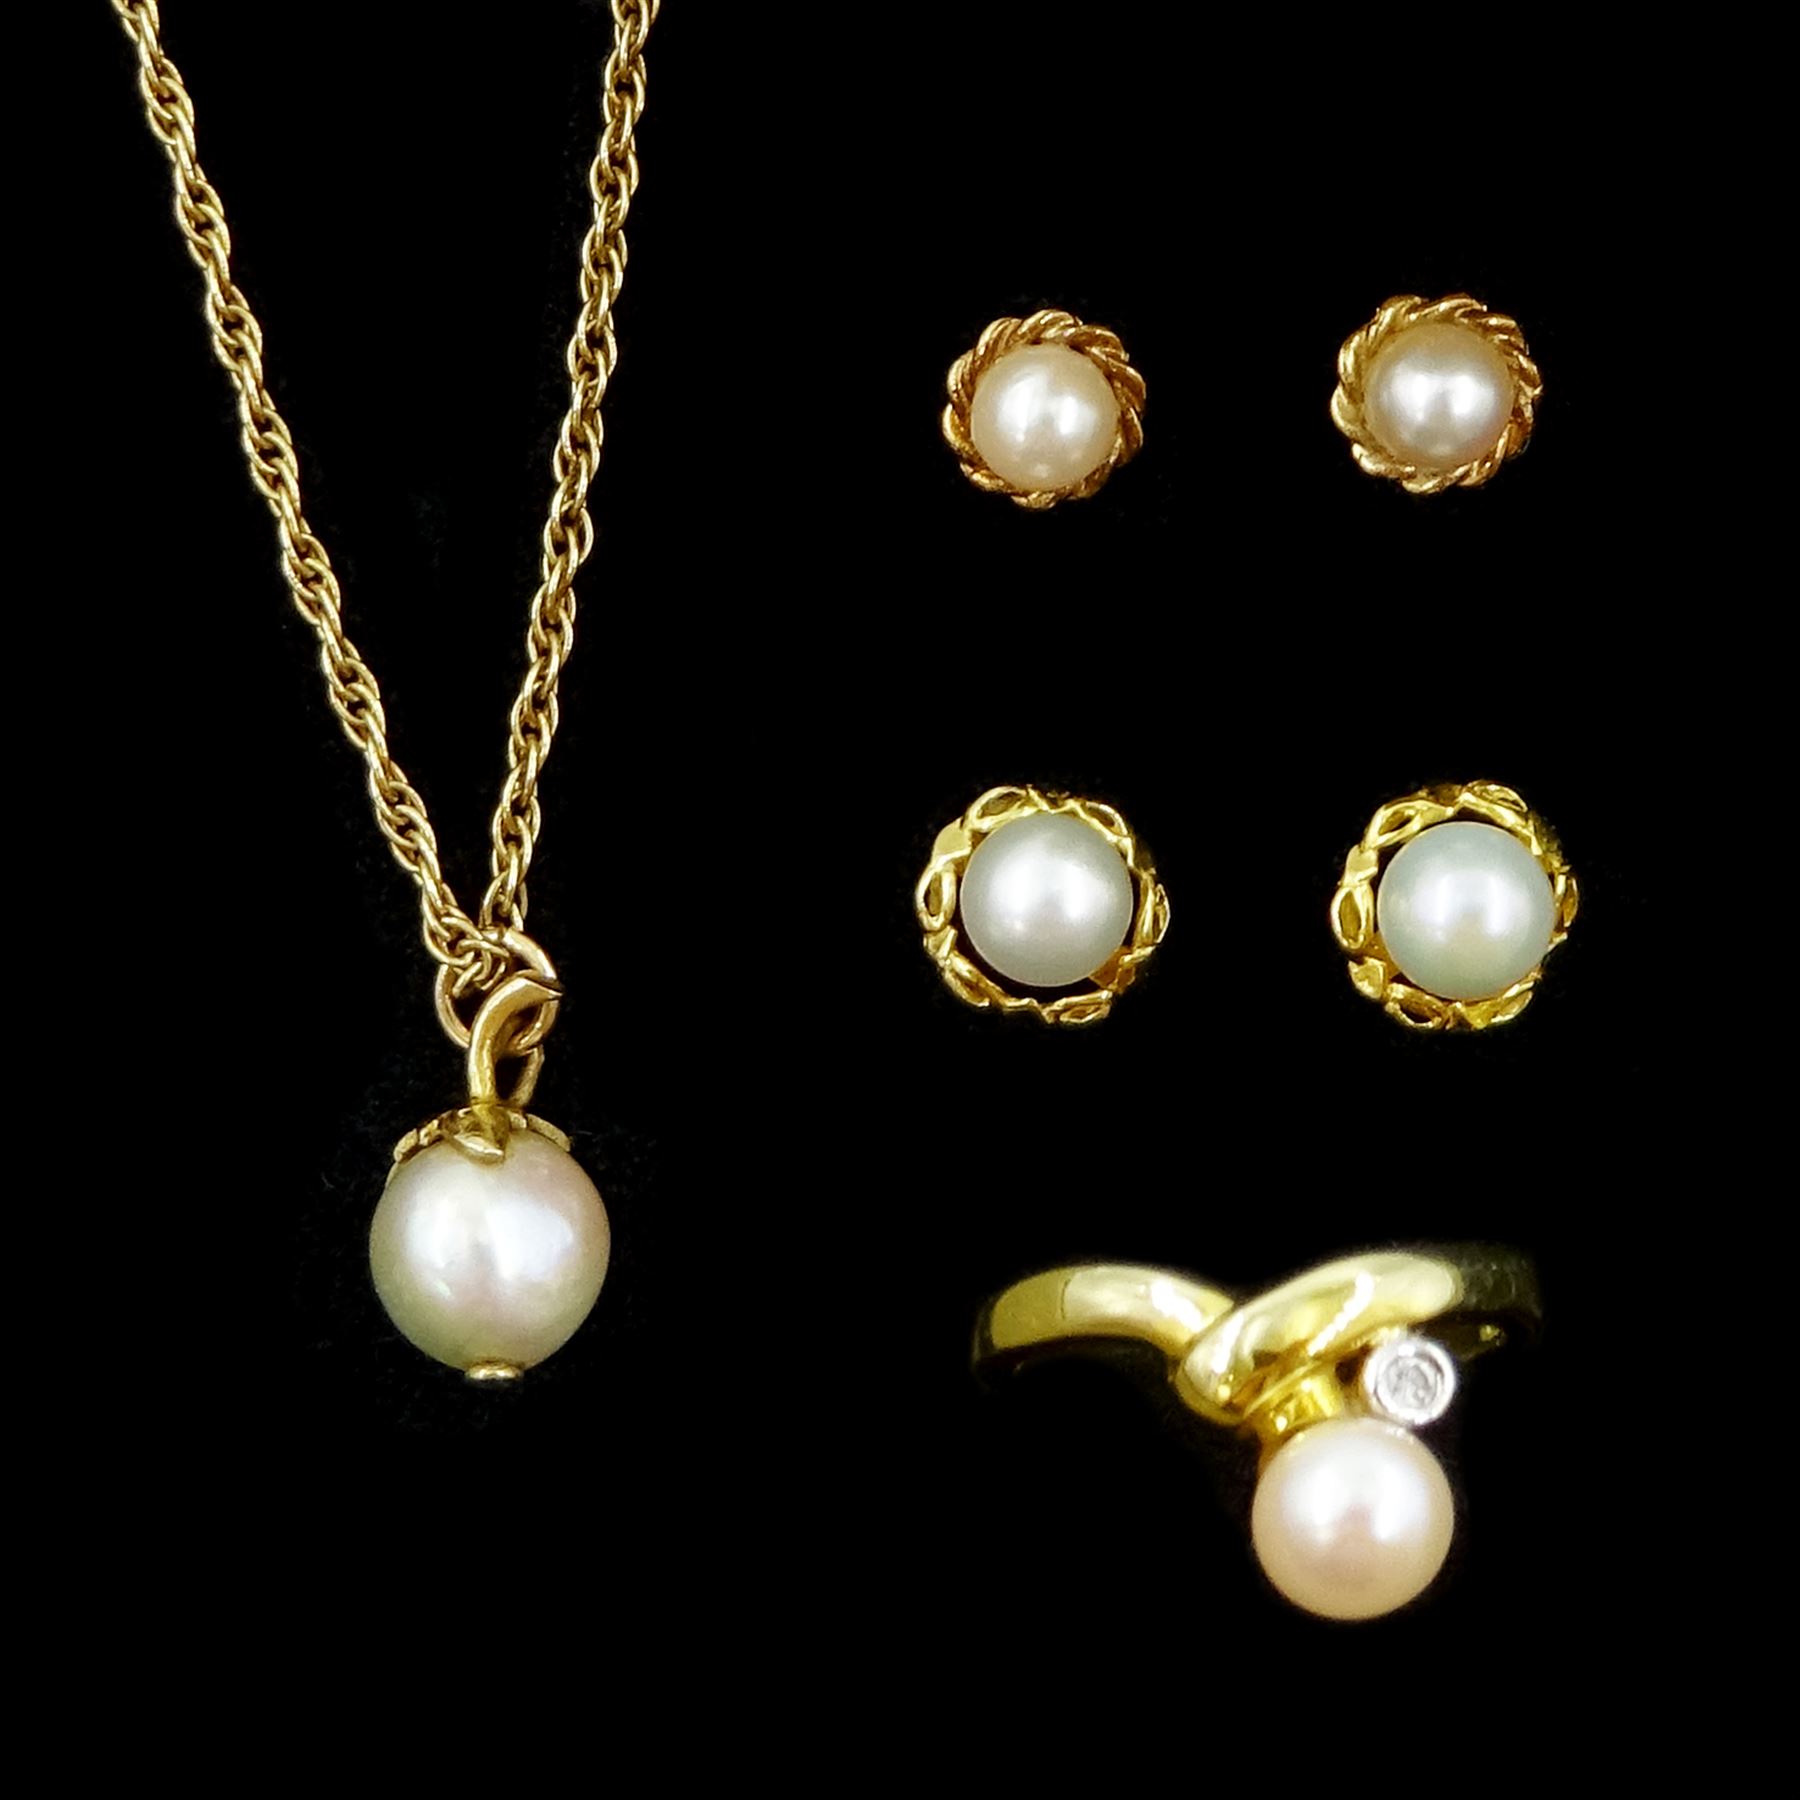 Pair of 14ct gold pearl stud earrings and 9ct gold pearl jewellery including pendant necklace